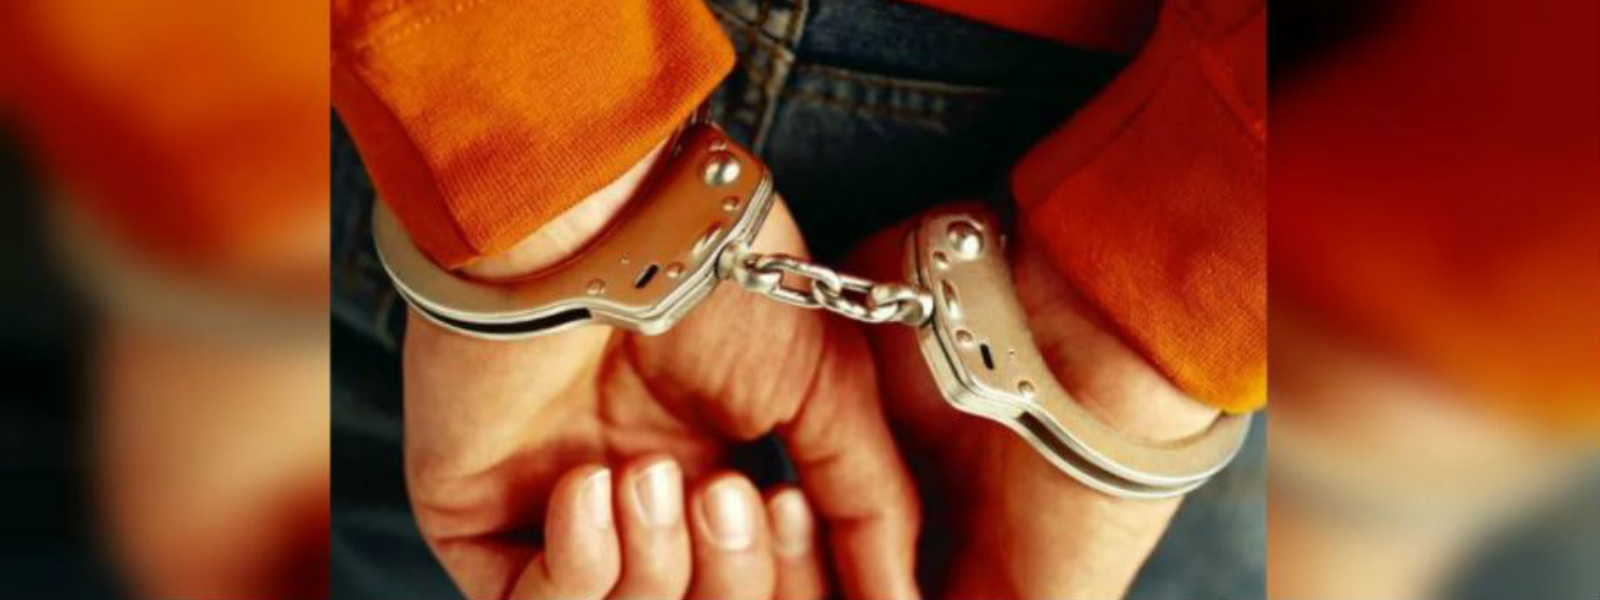 Two nabbed with heroin in Dehiwala, Mt. Lavinia